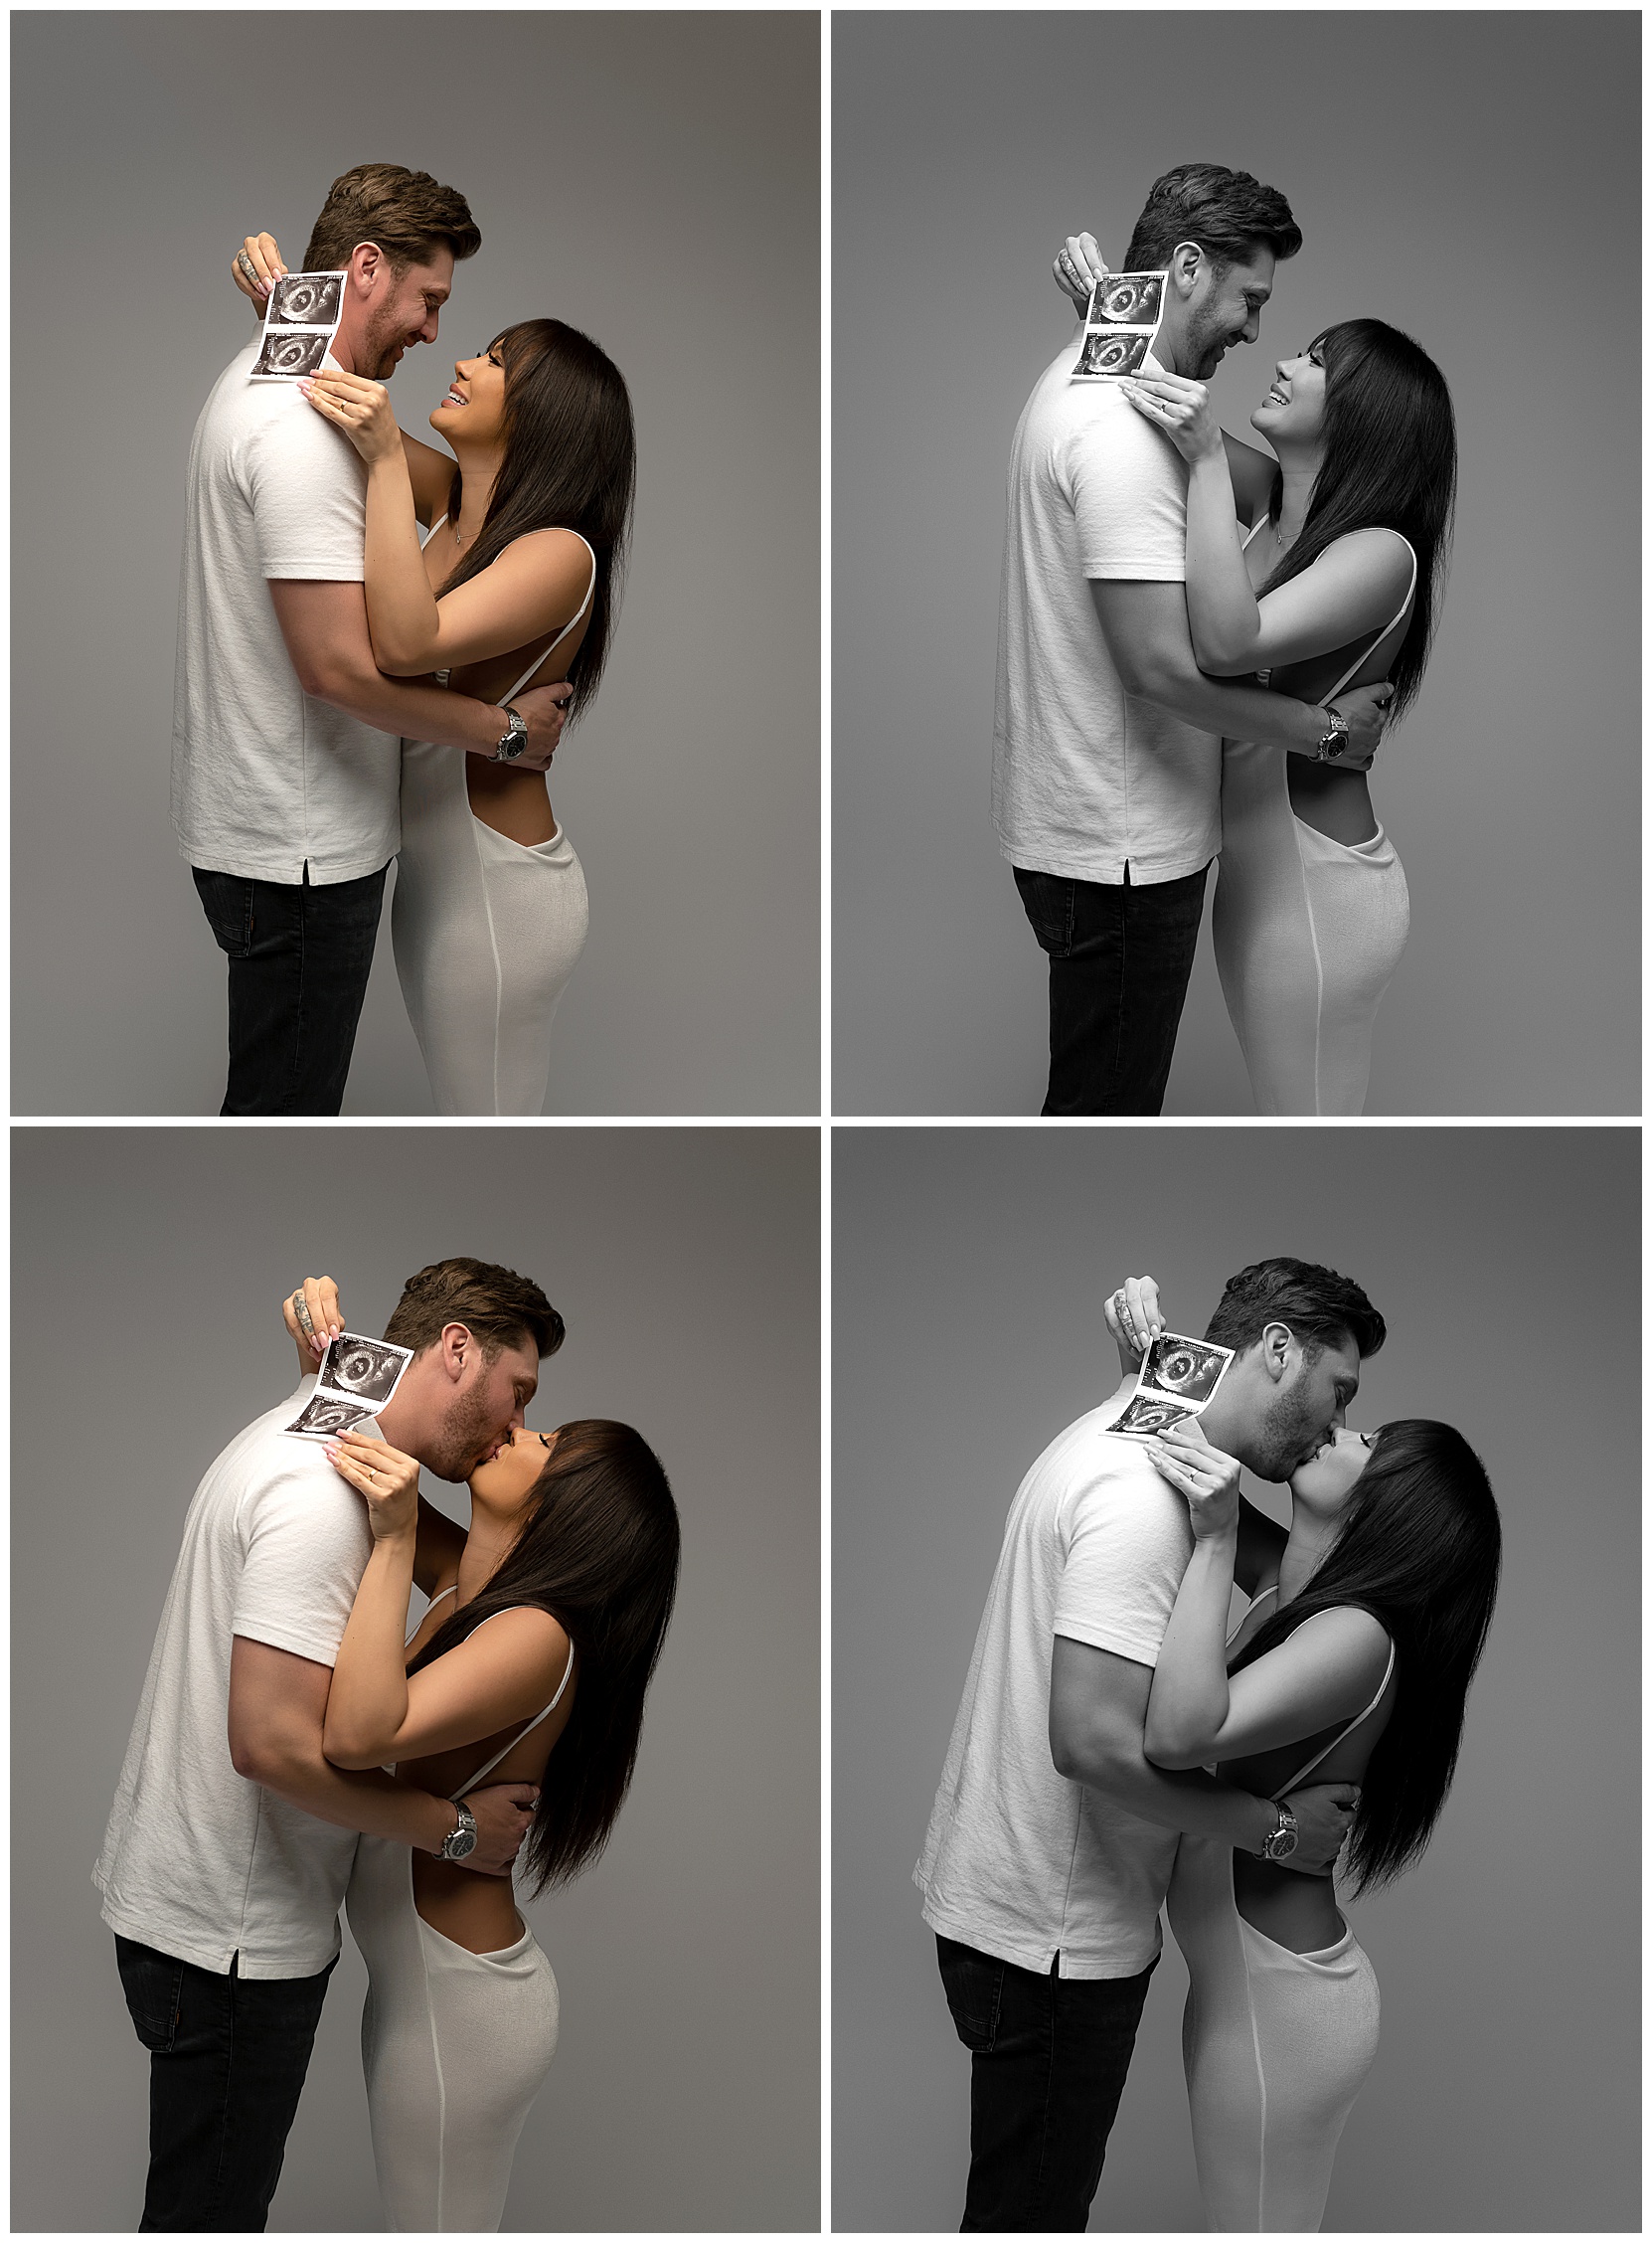 Set of four pregnancy announcement photos featuring two color photos and two black and white photos of a man and a woman holding an ultrasound photo